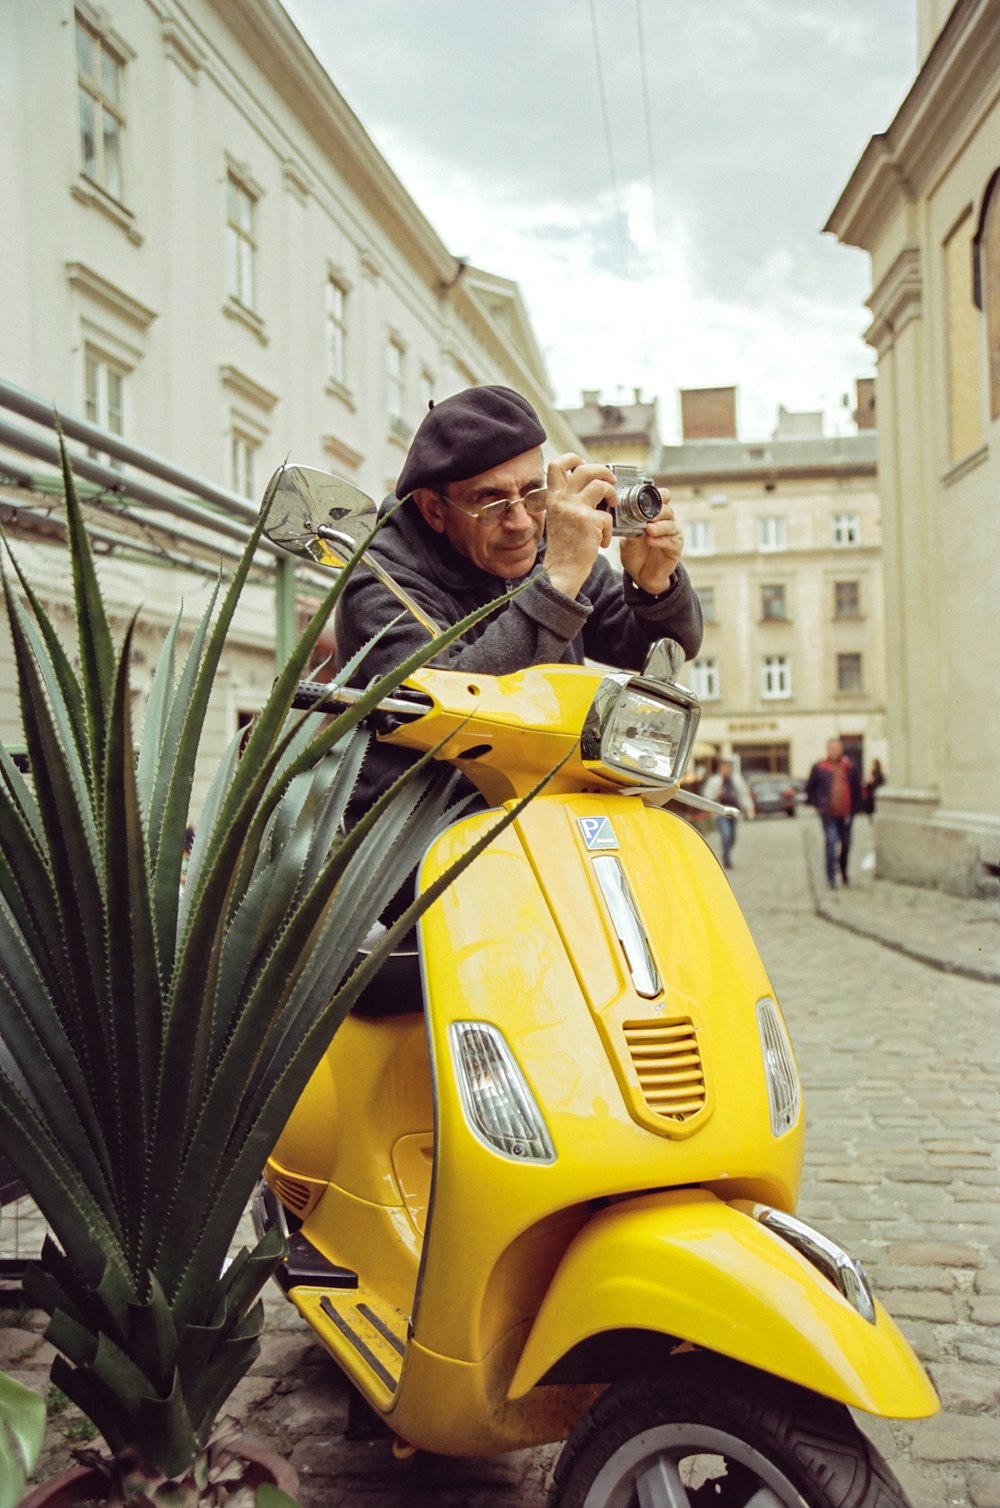 a man taking a picture of himself on a yellow scooter